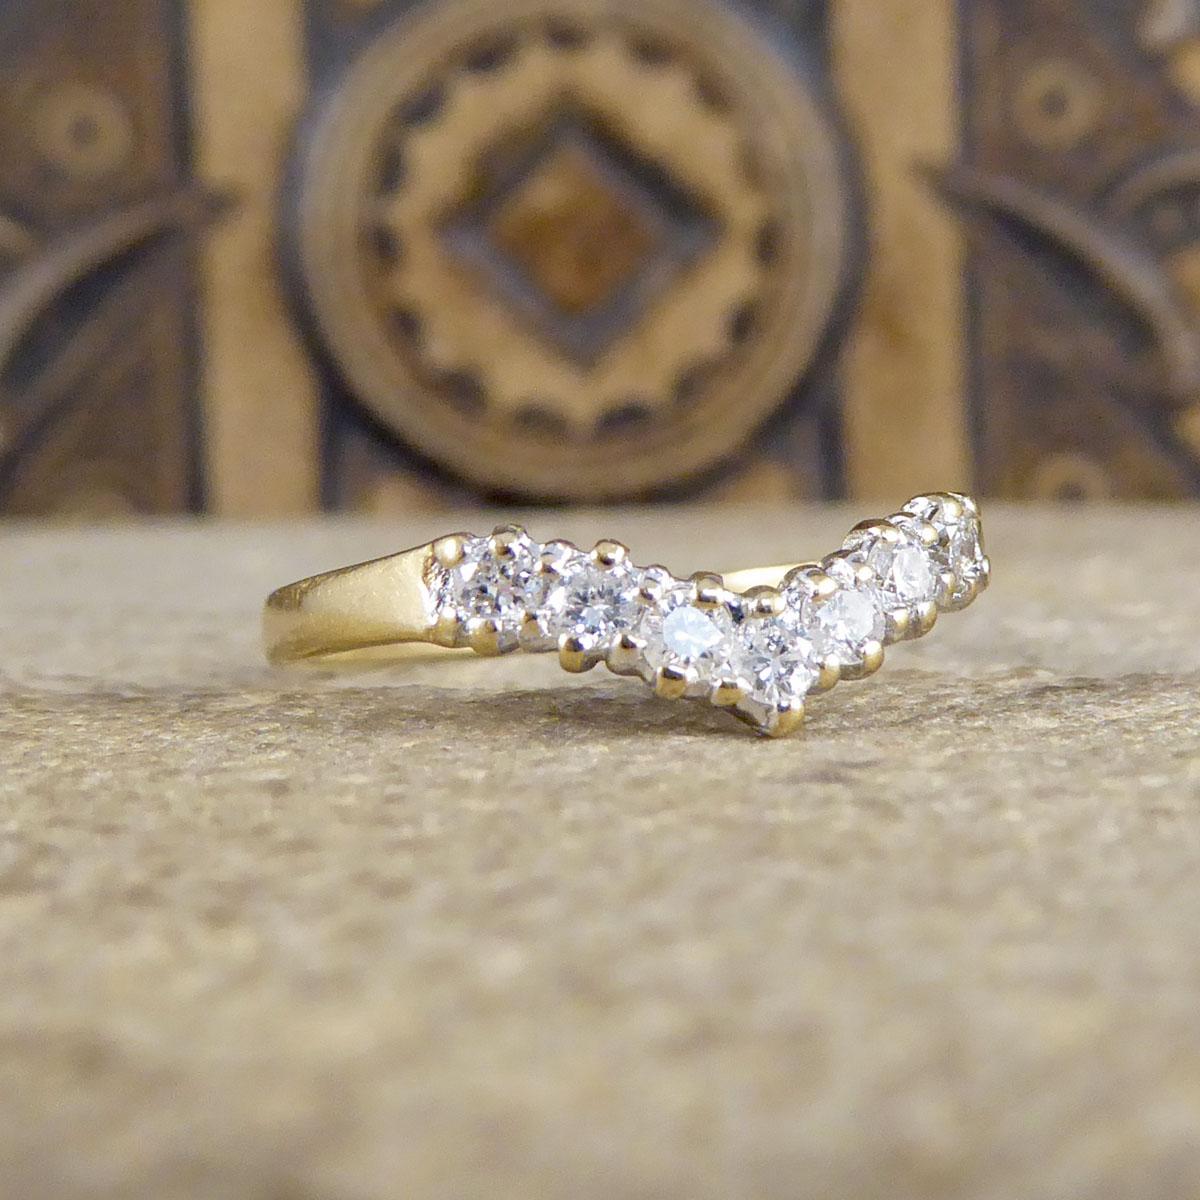 Featuring a delicate wishbone design, this 9ct Yellow Gold is adorned with sparkling Diamonds. Its slender gold band holds seven Modern Brilliant Cut Diamonds weighing a total of 0.25ct and its a class and beautiful design. 

Diamond Details:
Cut: